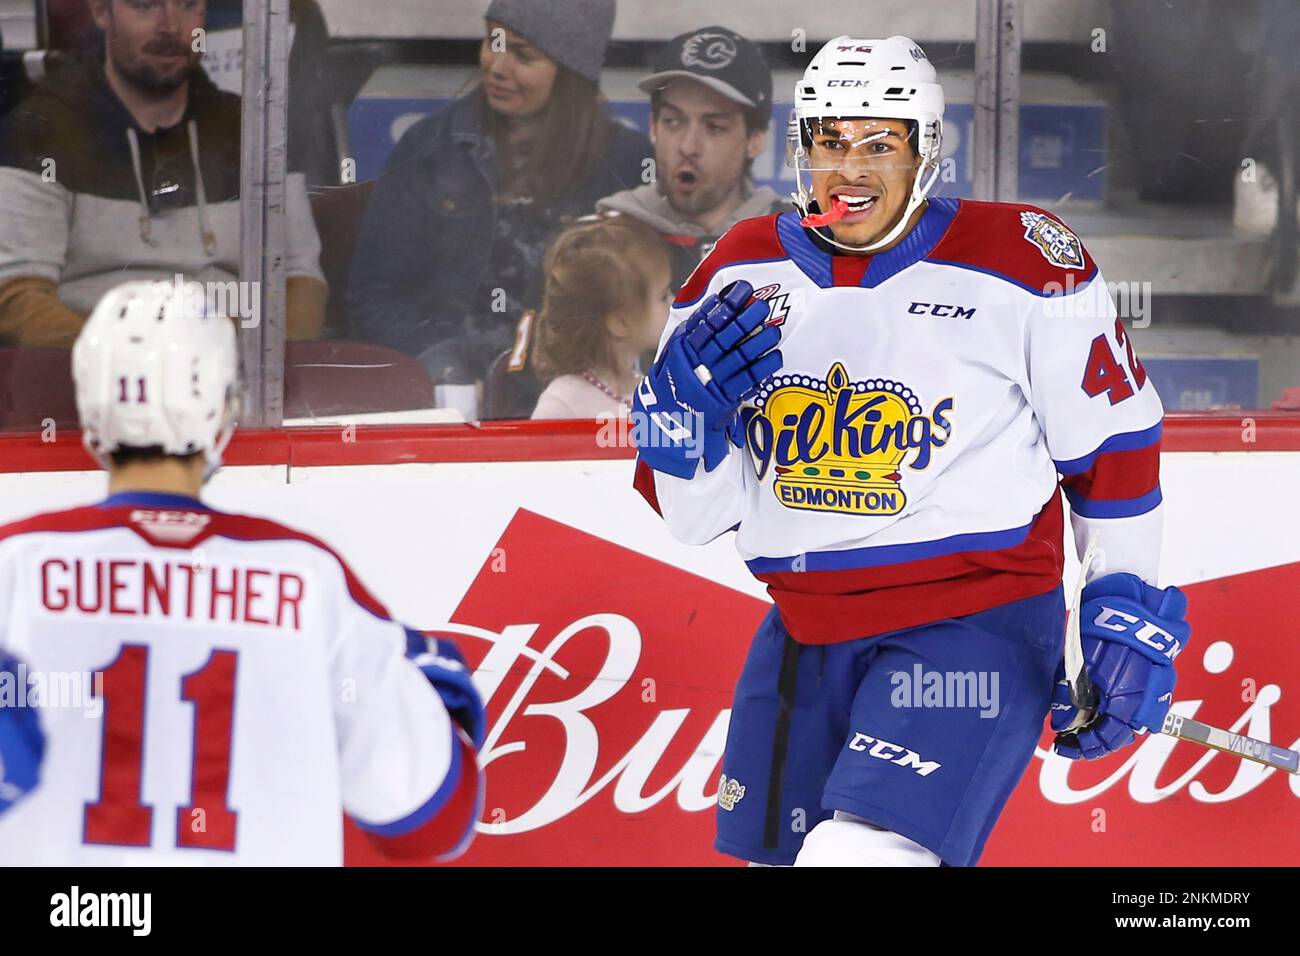 Edmonton Oil Kings player Justin Sourdif, rt, celebrates with Dylan Guenther his goal against the Calgary Hitmen during WHL (Western Hockey League) hockey action in Calgary, Alta., on Saturday, March 5, 2022